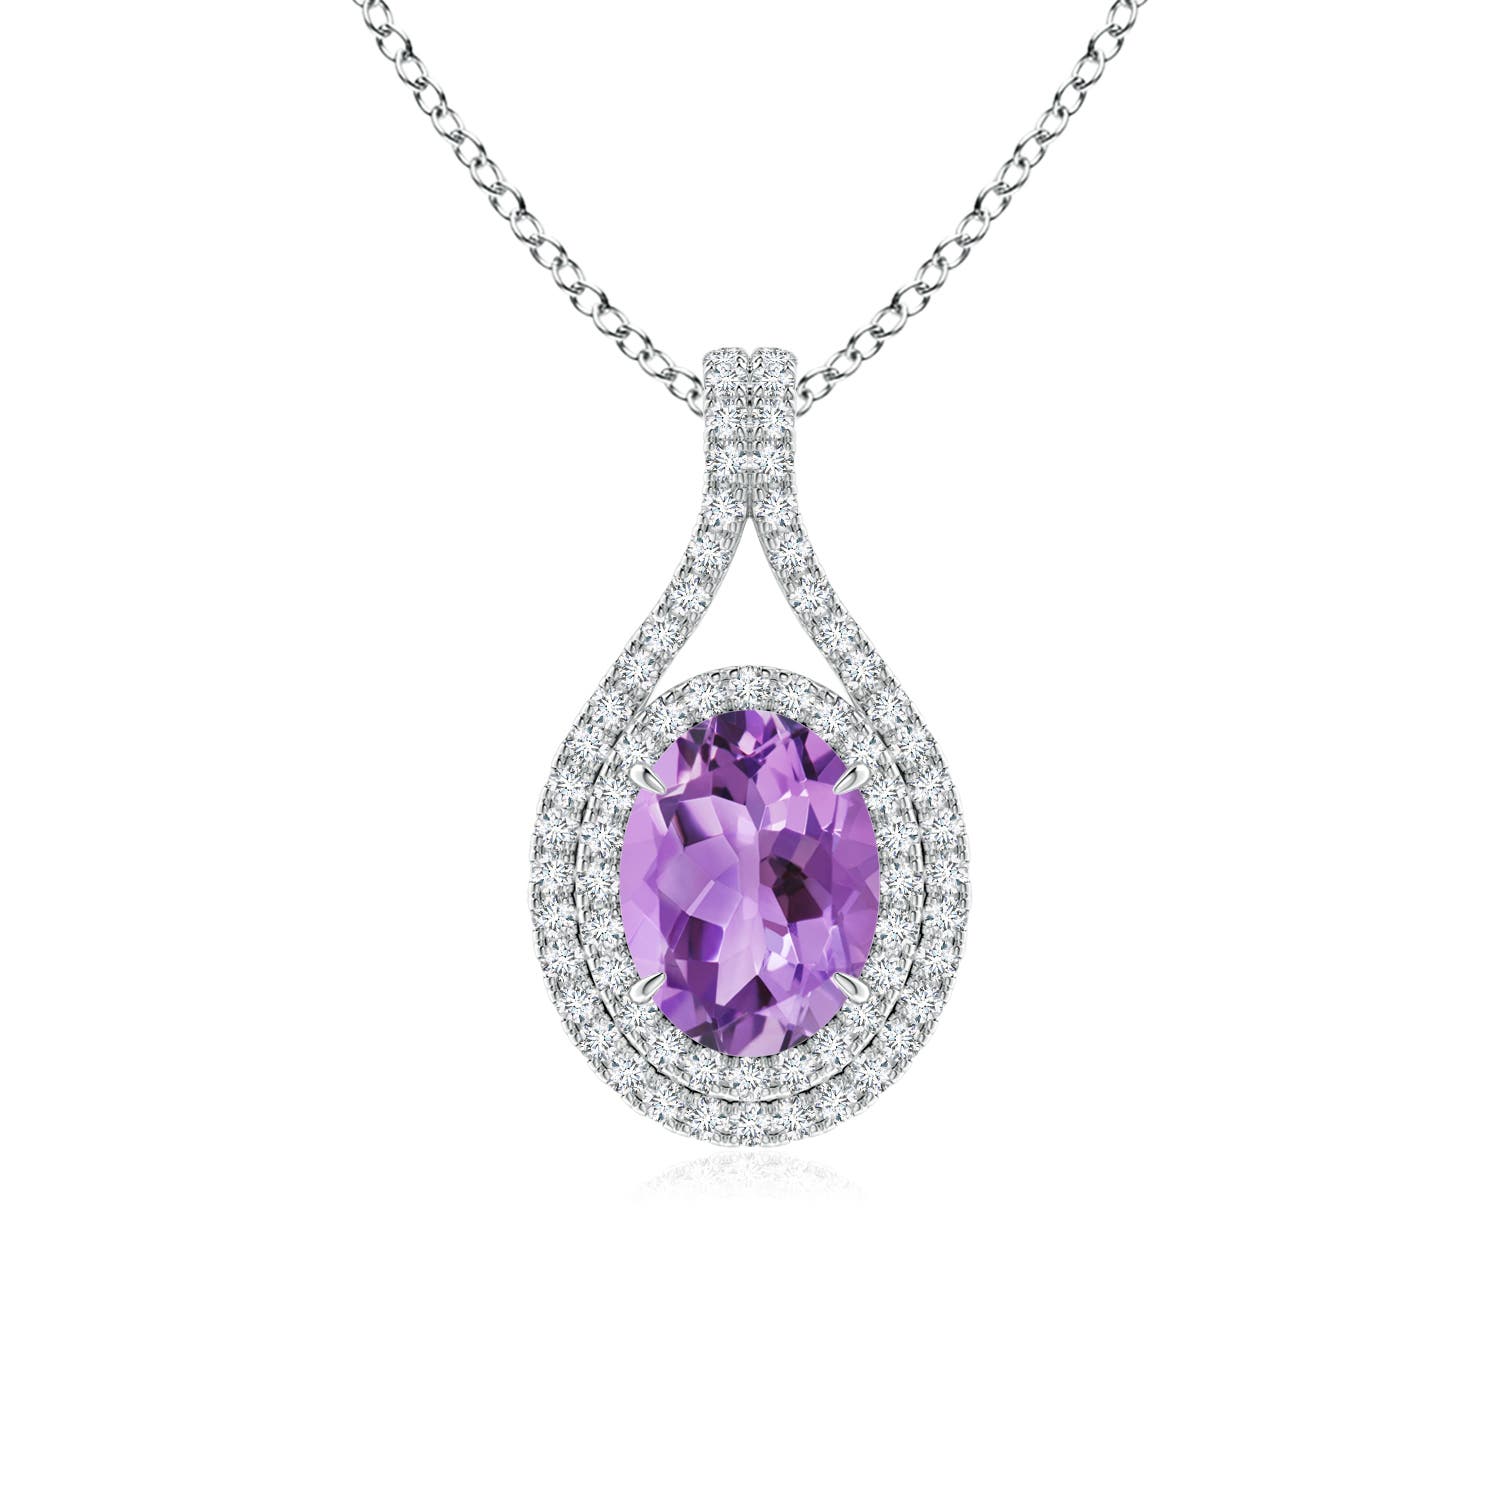 A - Amethyst / 1.45 CT / 14 KT White Gold